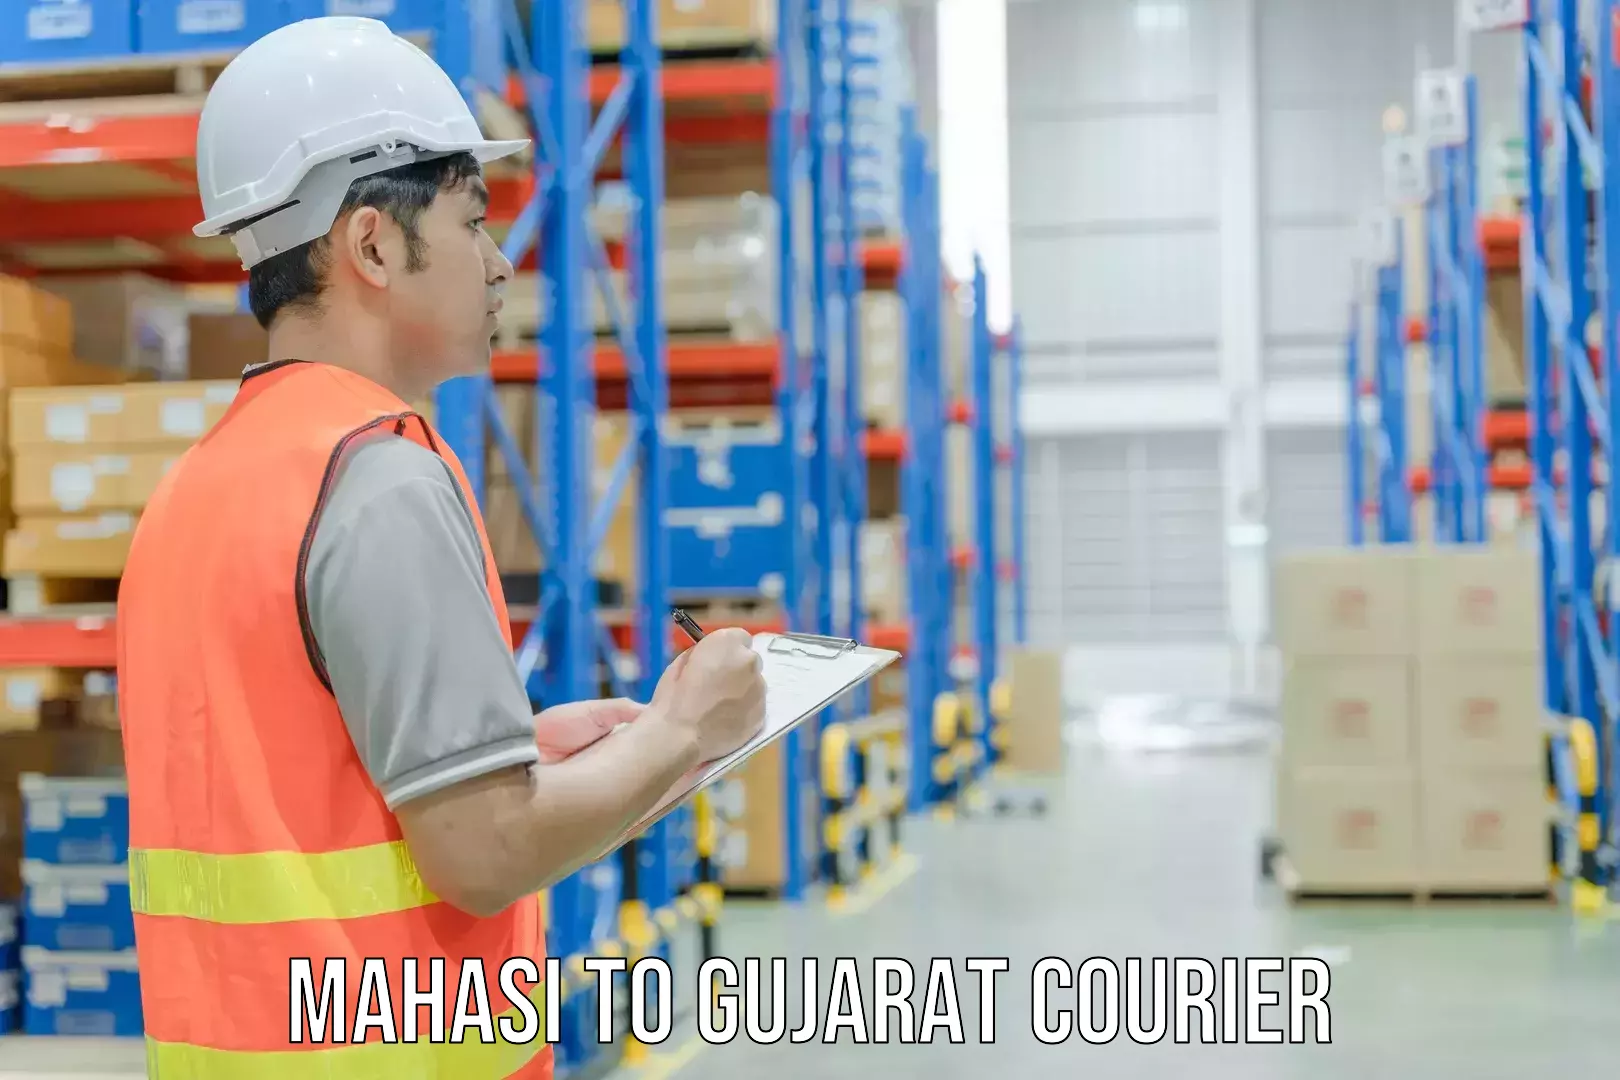 Cost-effective courier options Mahasi to Ahmedabad